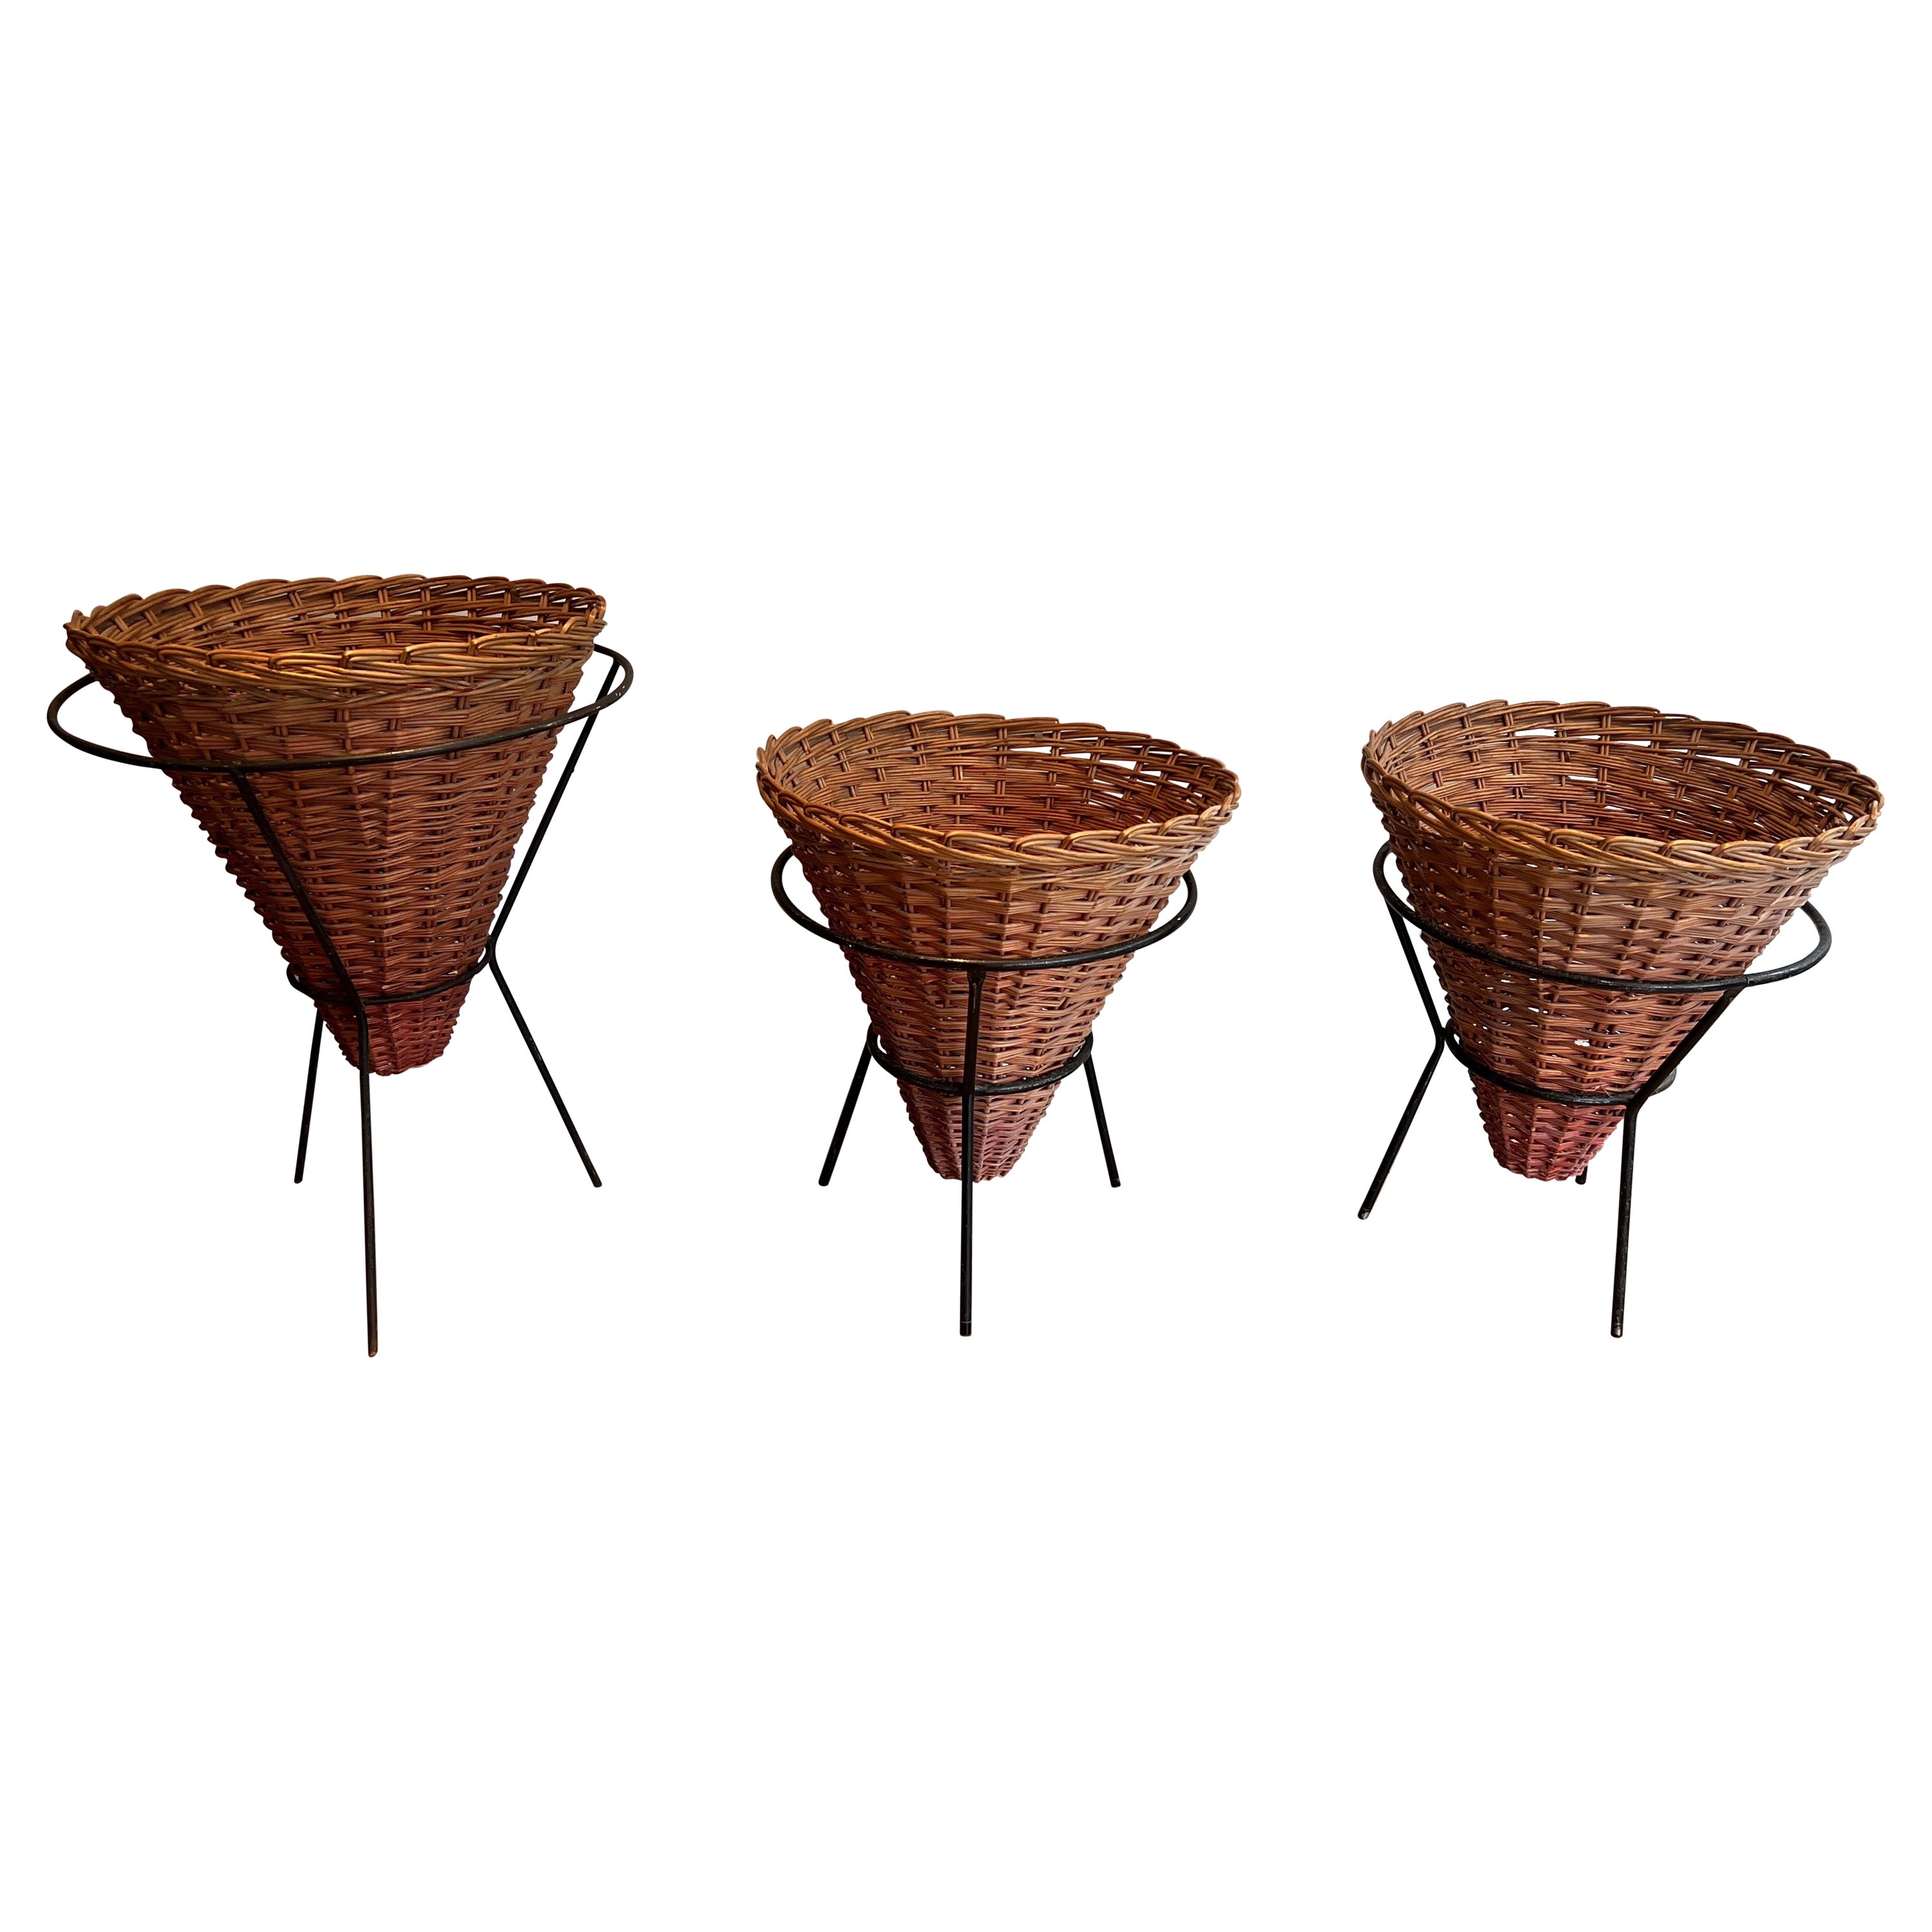 Set of Three Black Lacquered Metal and Rattan Planters, French Work, circa 1950